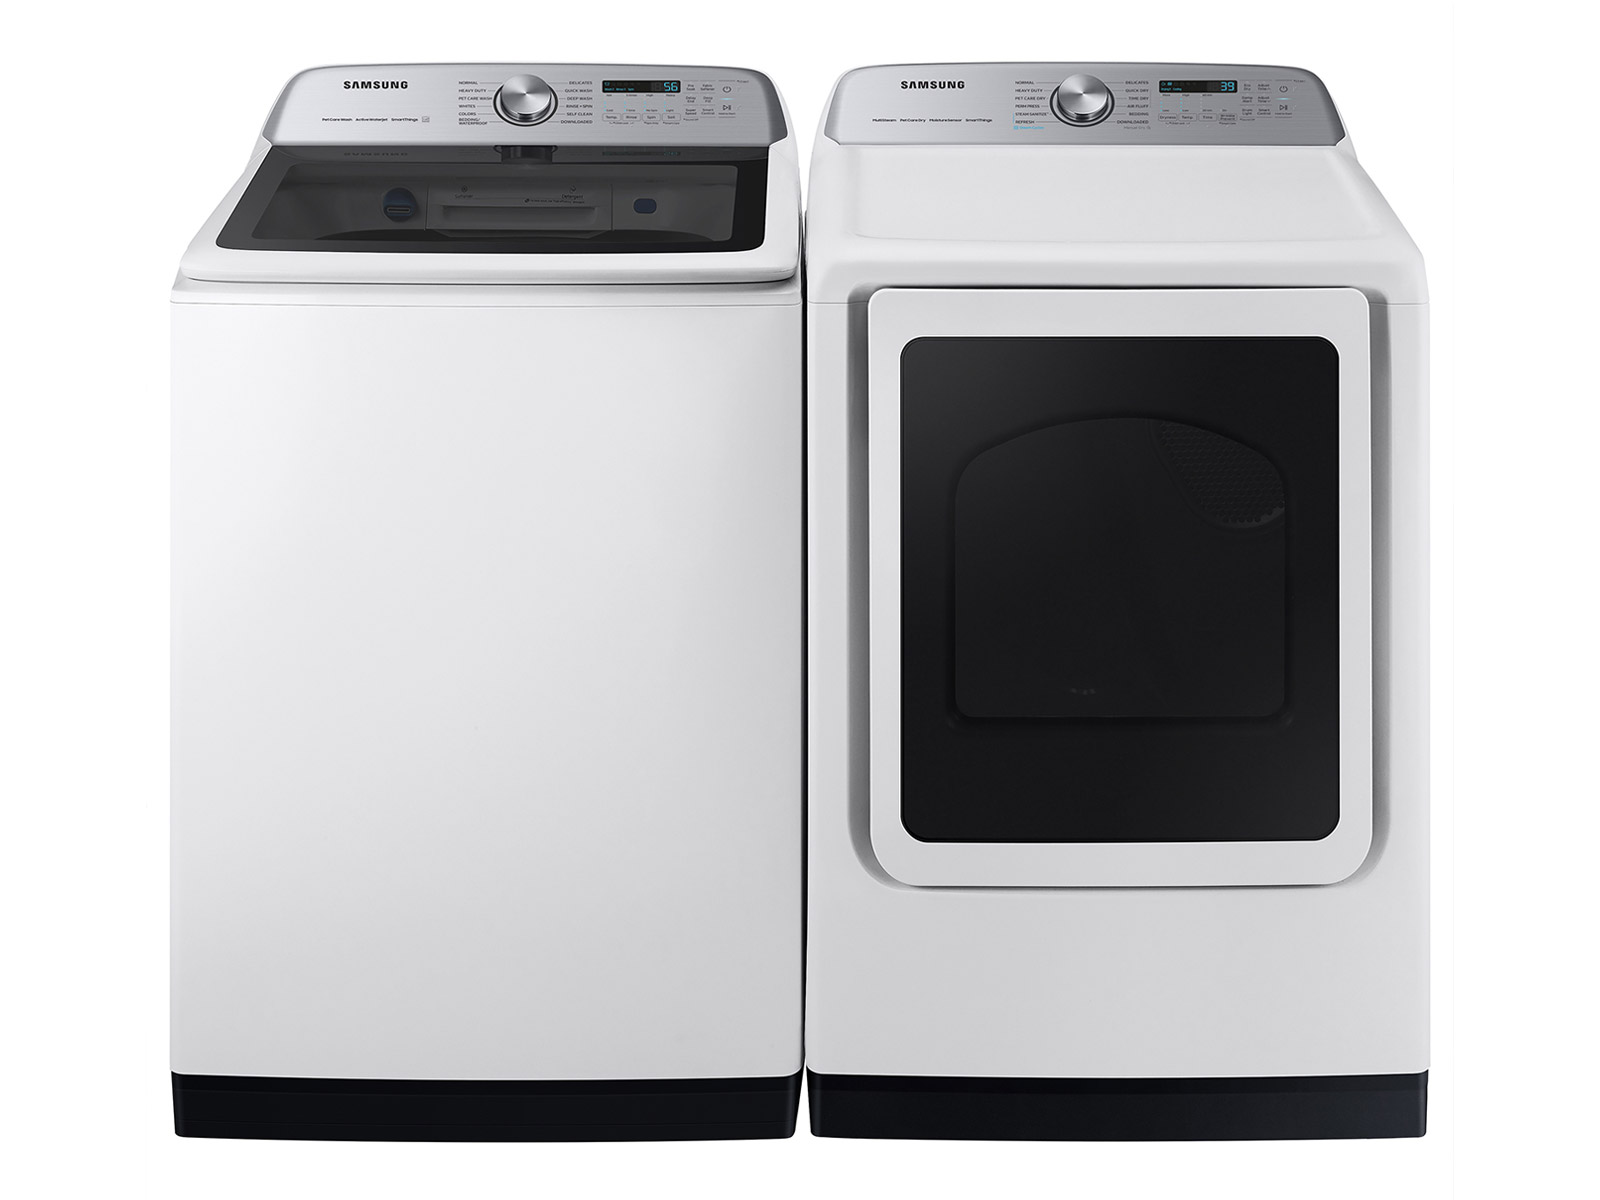 Photos - Washing Machine Samsung 5.4 cu. ft. Smart Top Load Washer with Pet Care Solution and Super 